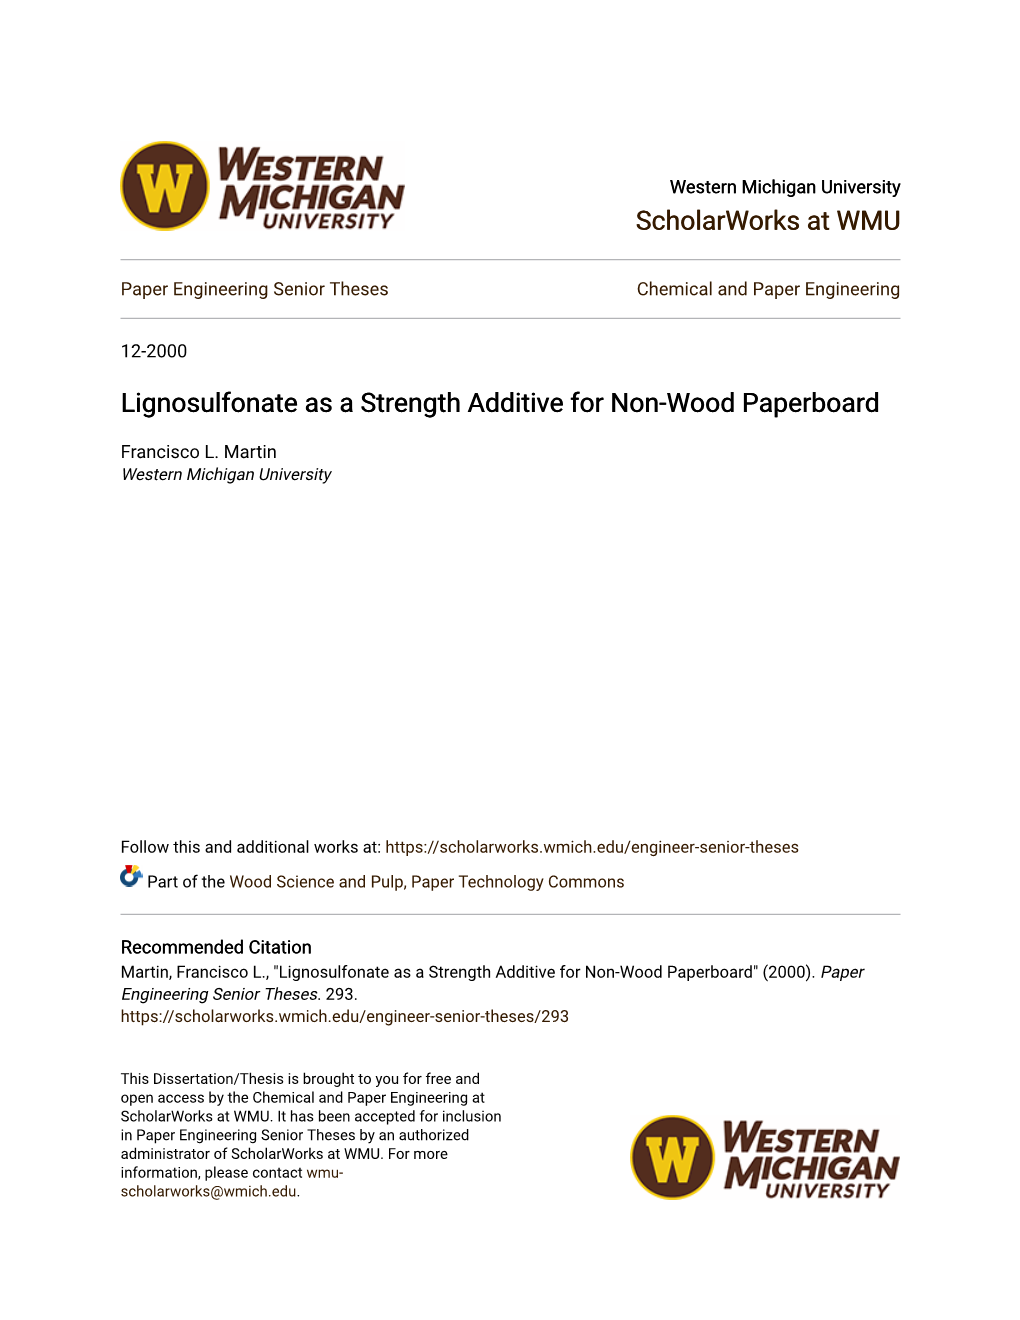 Lignosulfonate As a Strength Additive for Non-Wood Paperboard